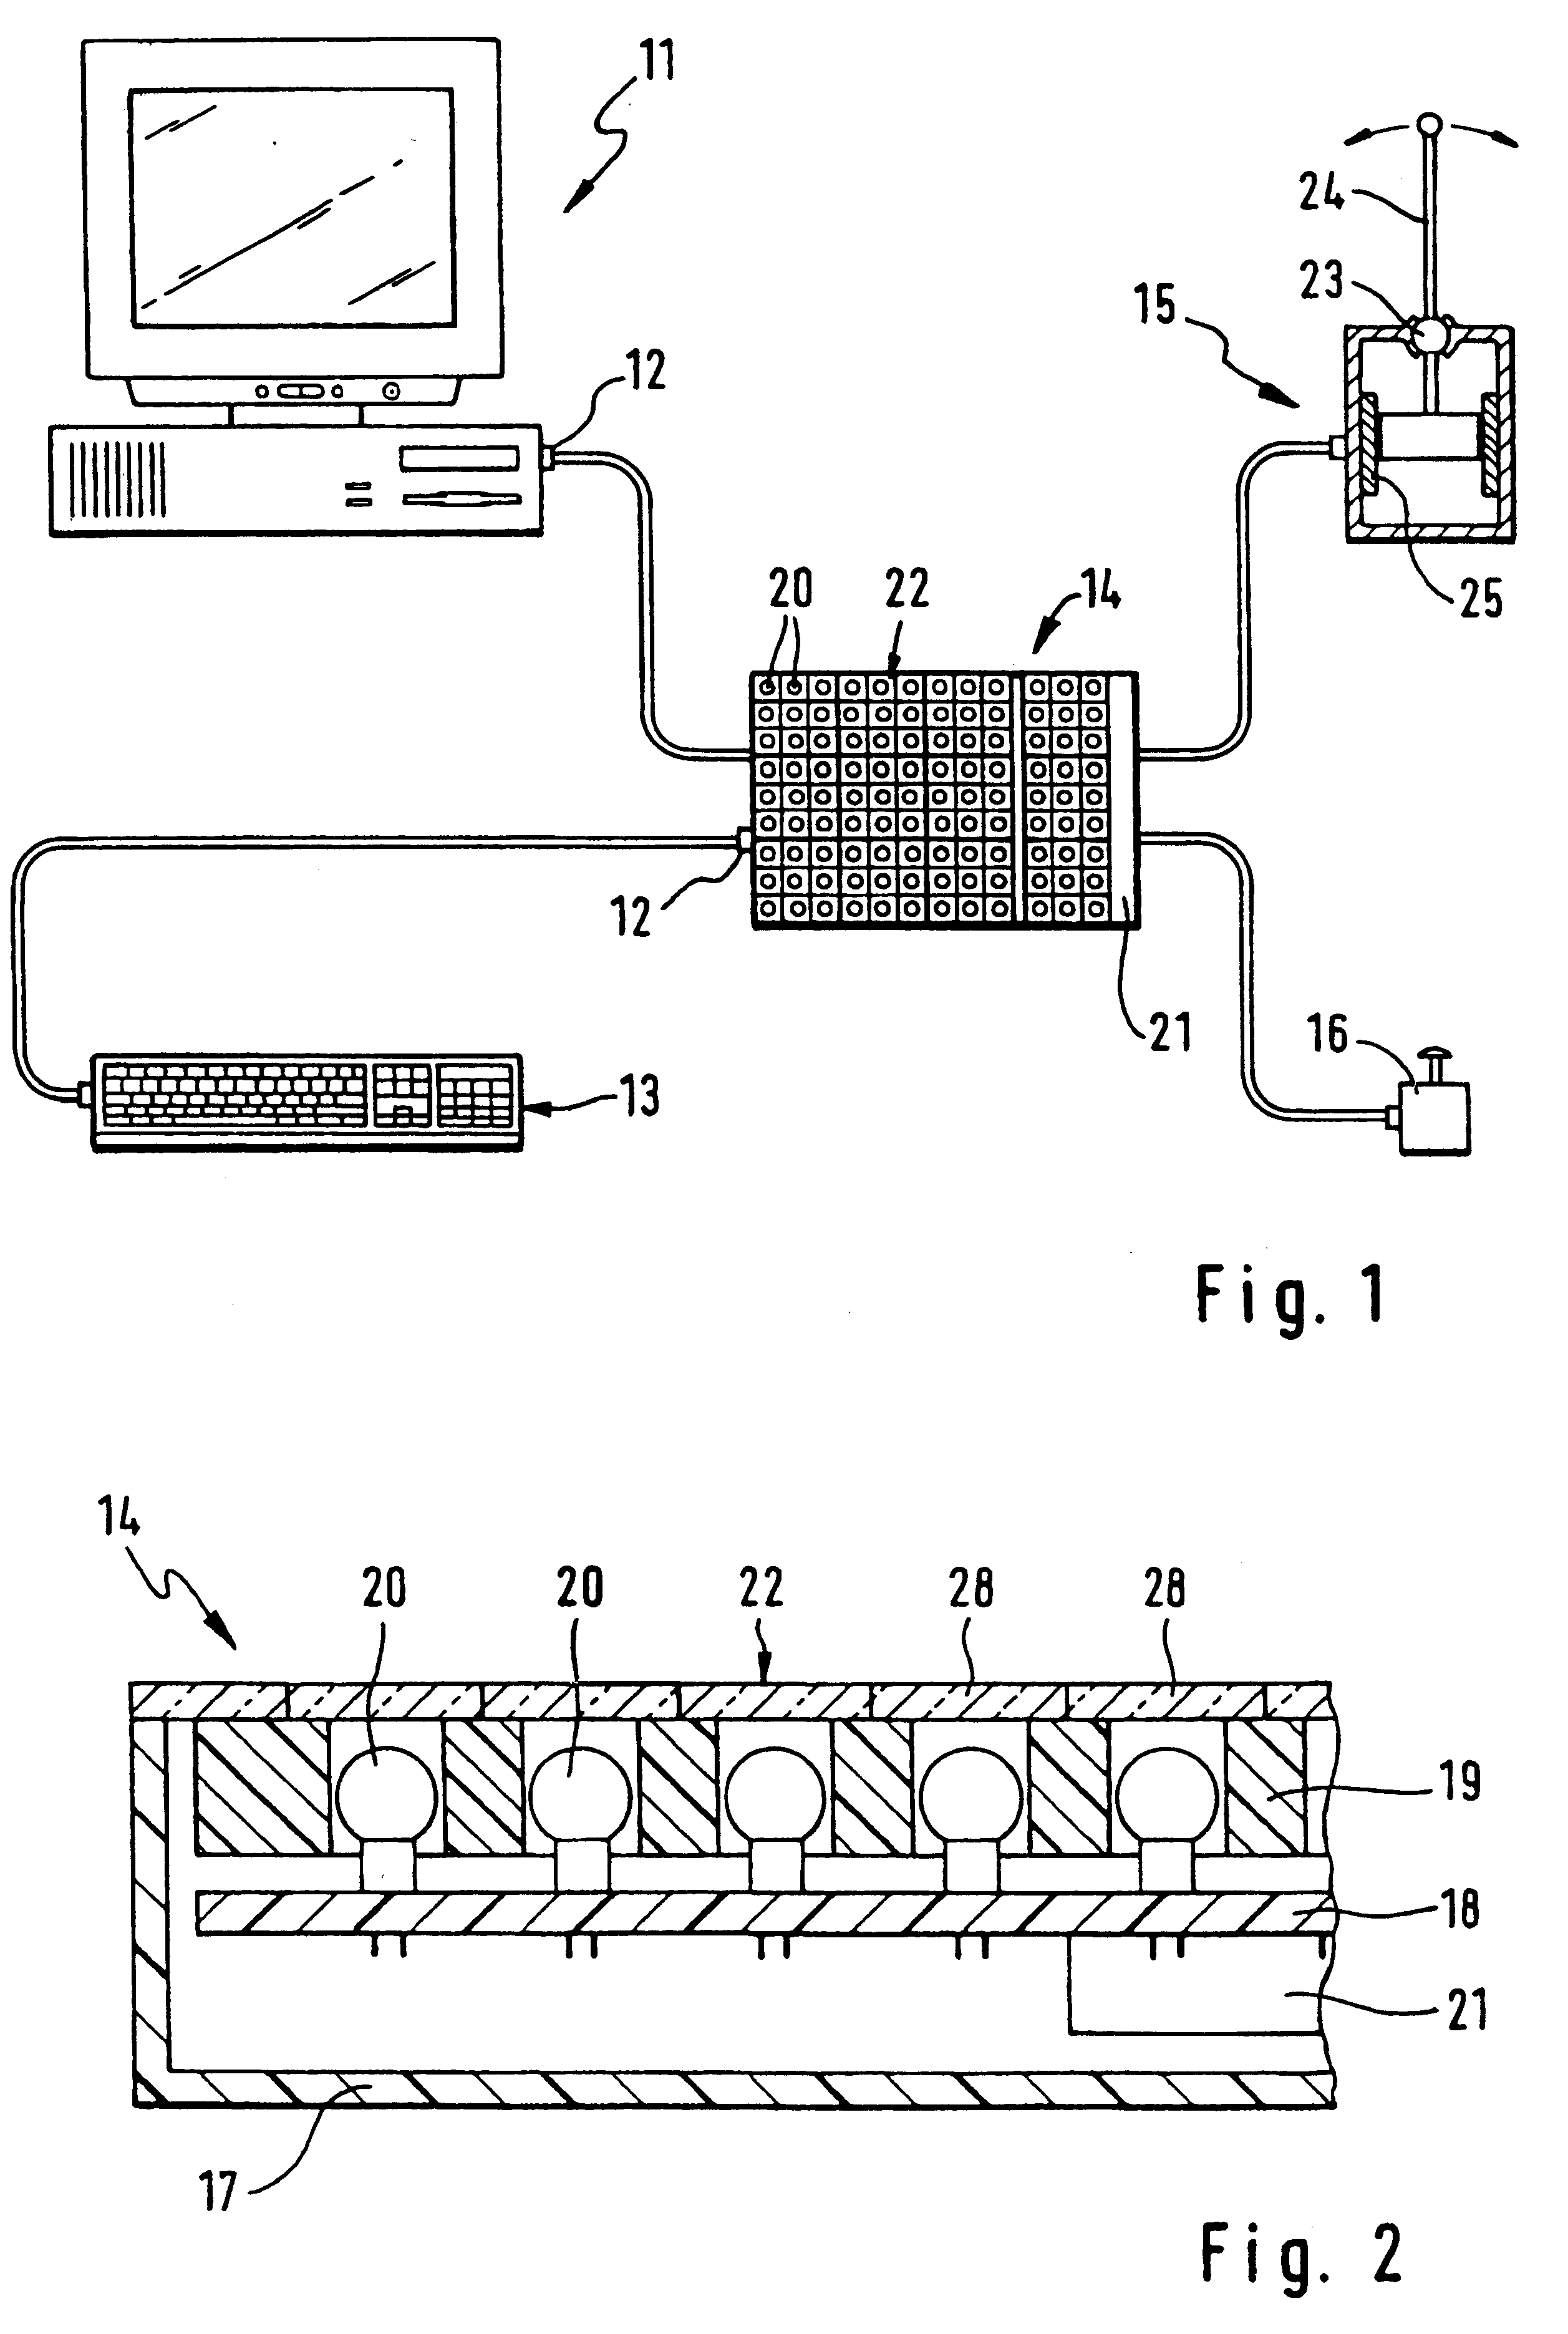 Method for transferring characters especially to a computer and an input device which functions according to this method